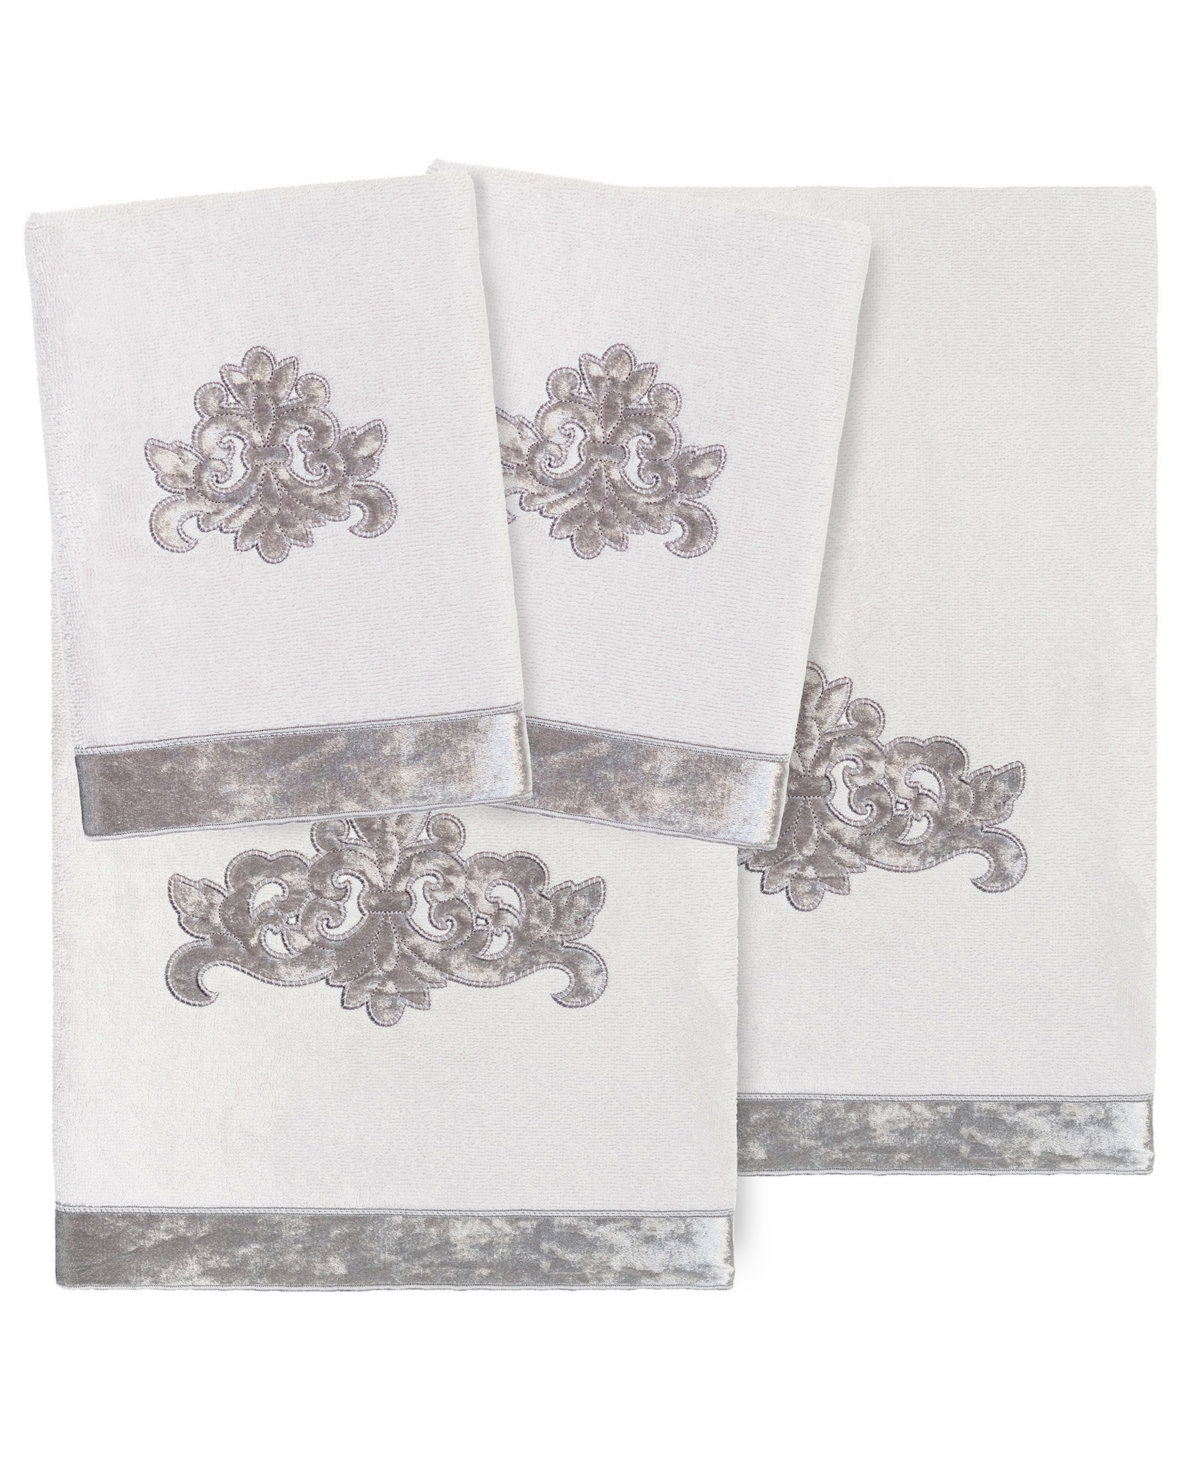 Linum Home Textiles Turkish Cotton May Embellished Towel Set, 4 Piece Bedding In Silver